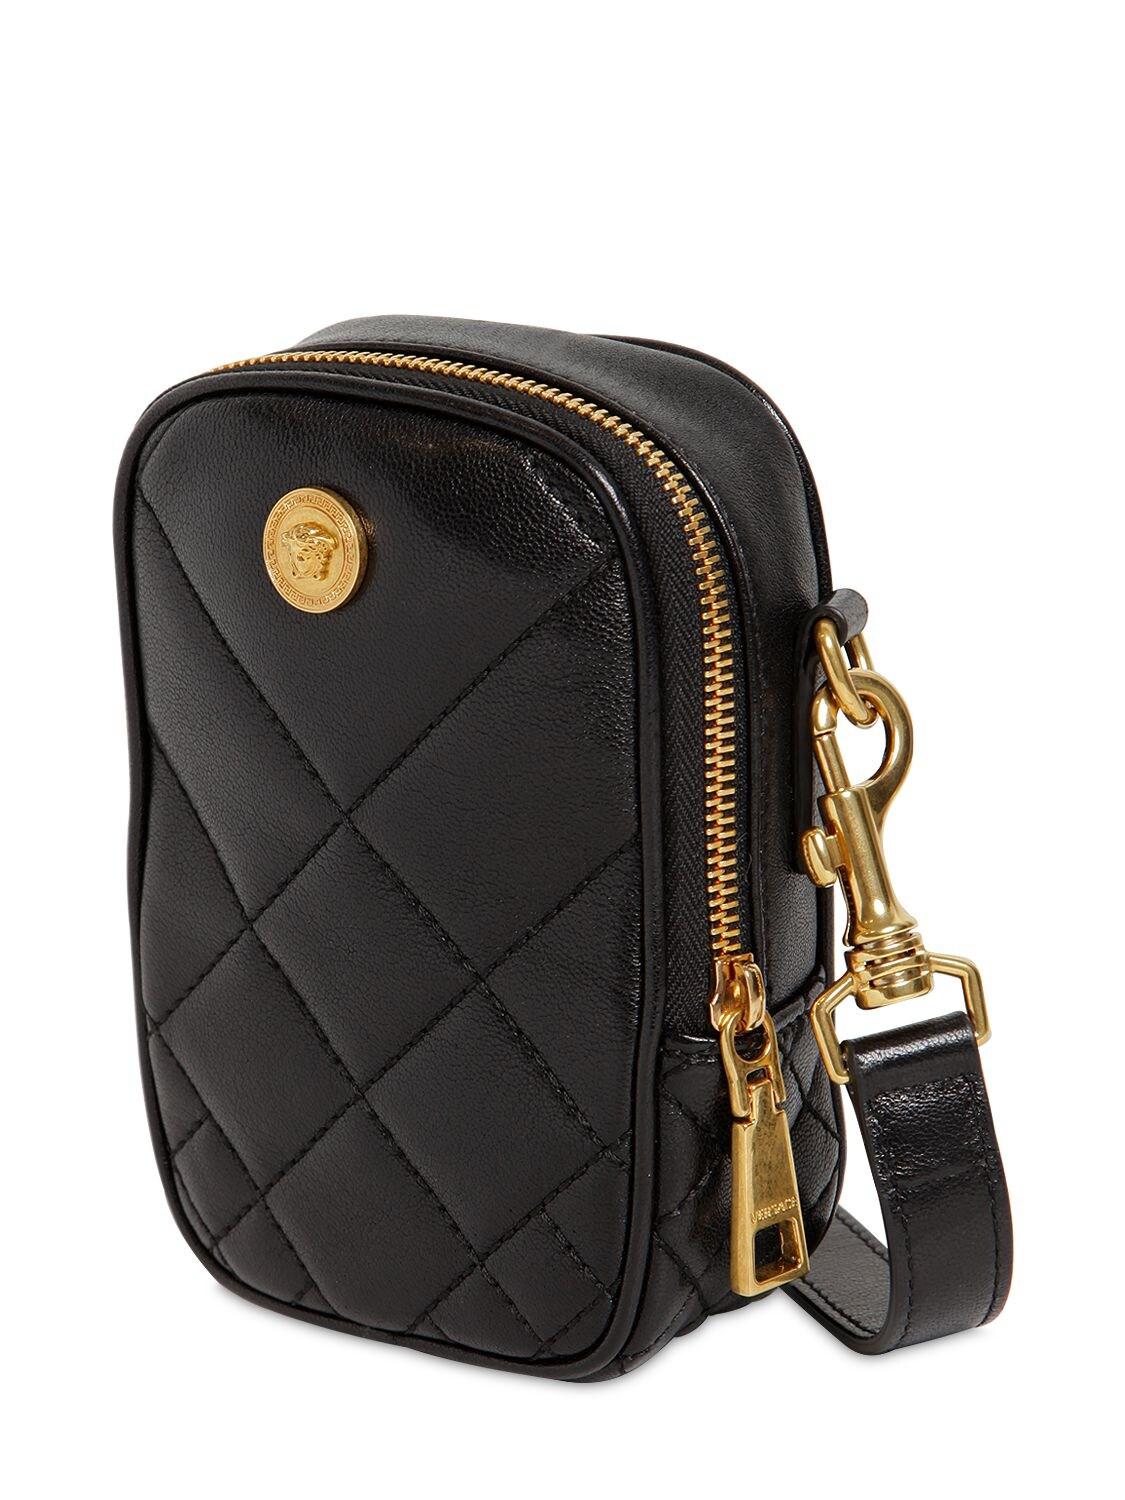 Versace Mini Quilted Leather Crossbody Bag in Black for Men - Lyst